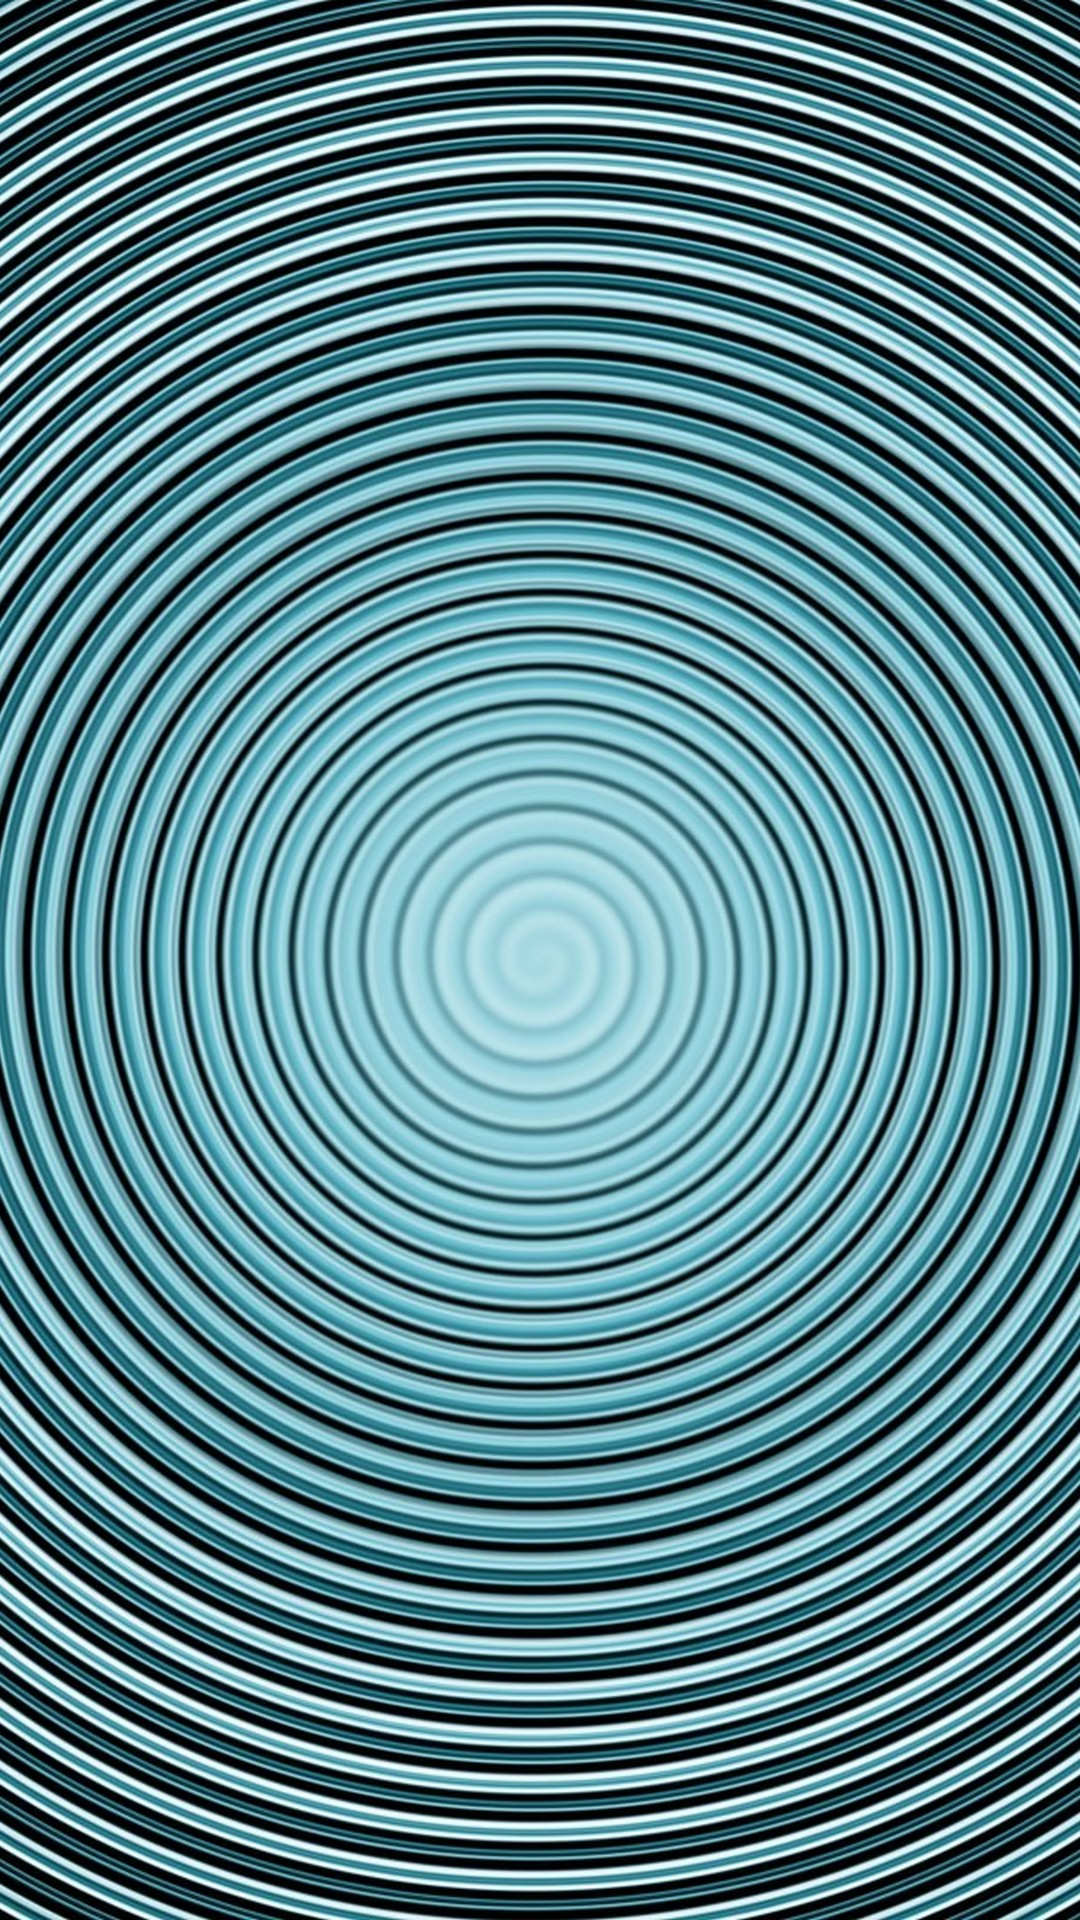 Cool Trippy Wallpaper For iPhone with HD Resolution 1080X1920